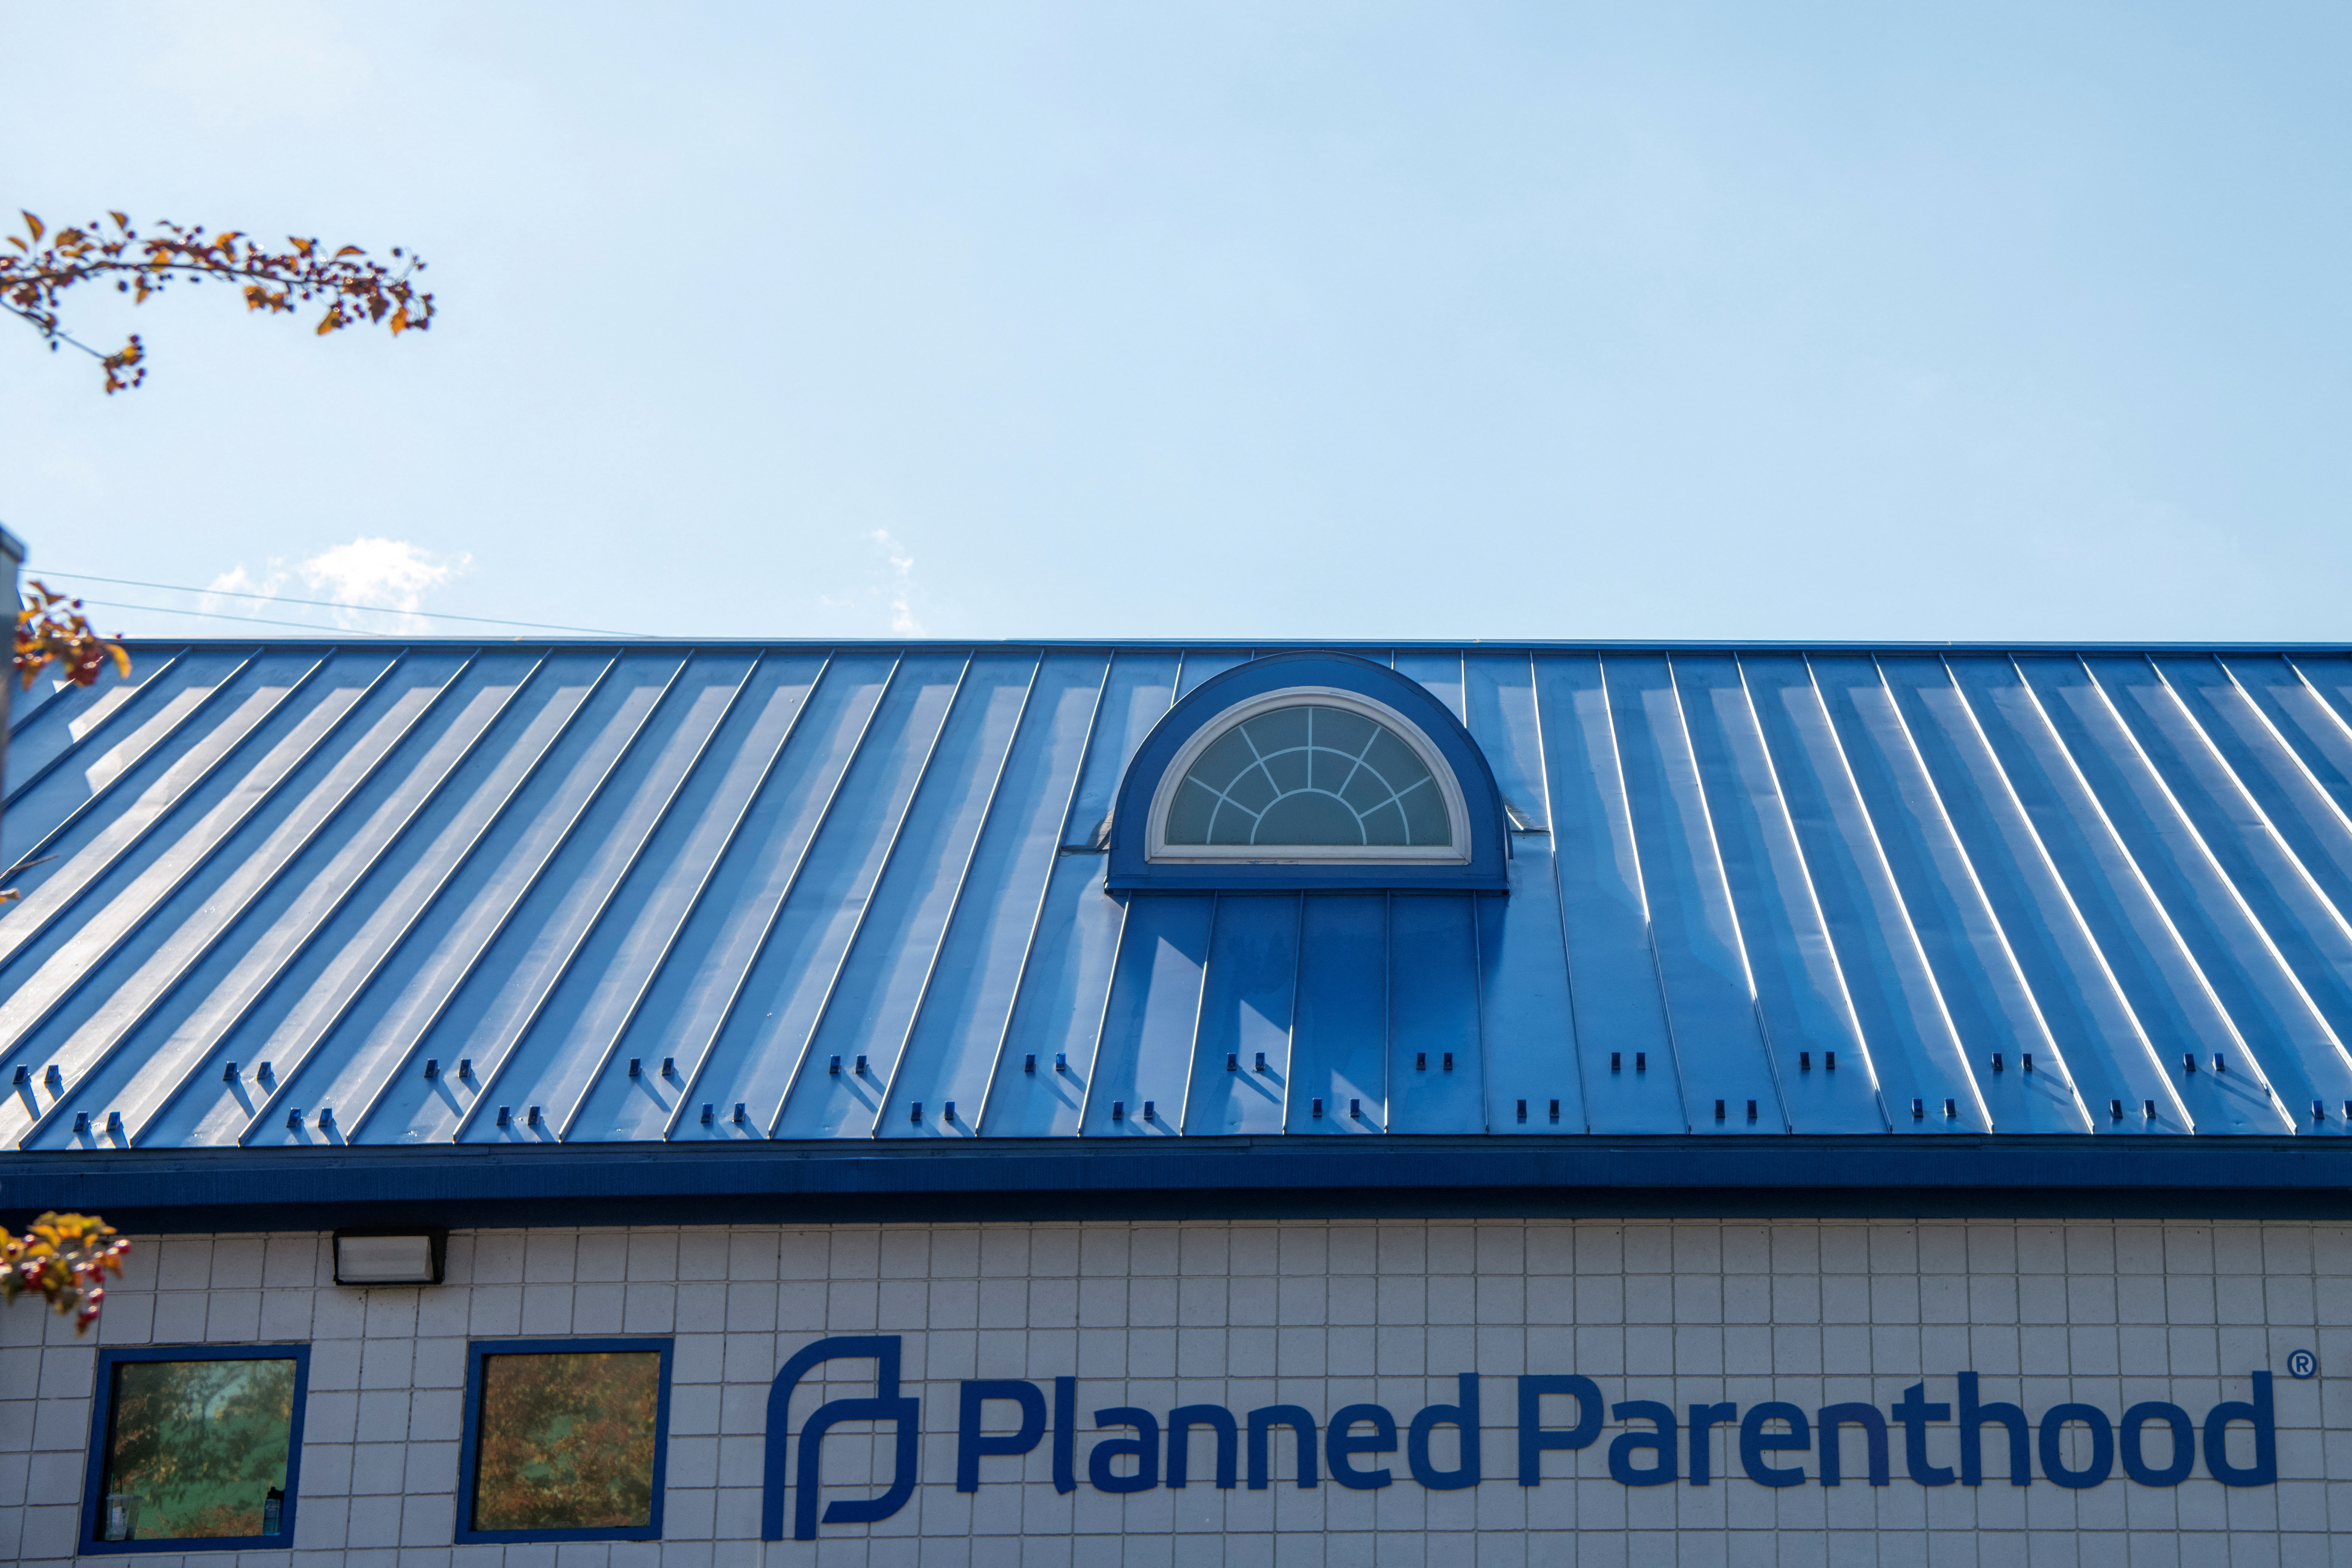 A view outside Planned Parenthood in Ohio as abortion debate rages